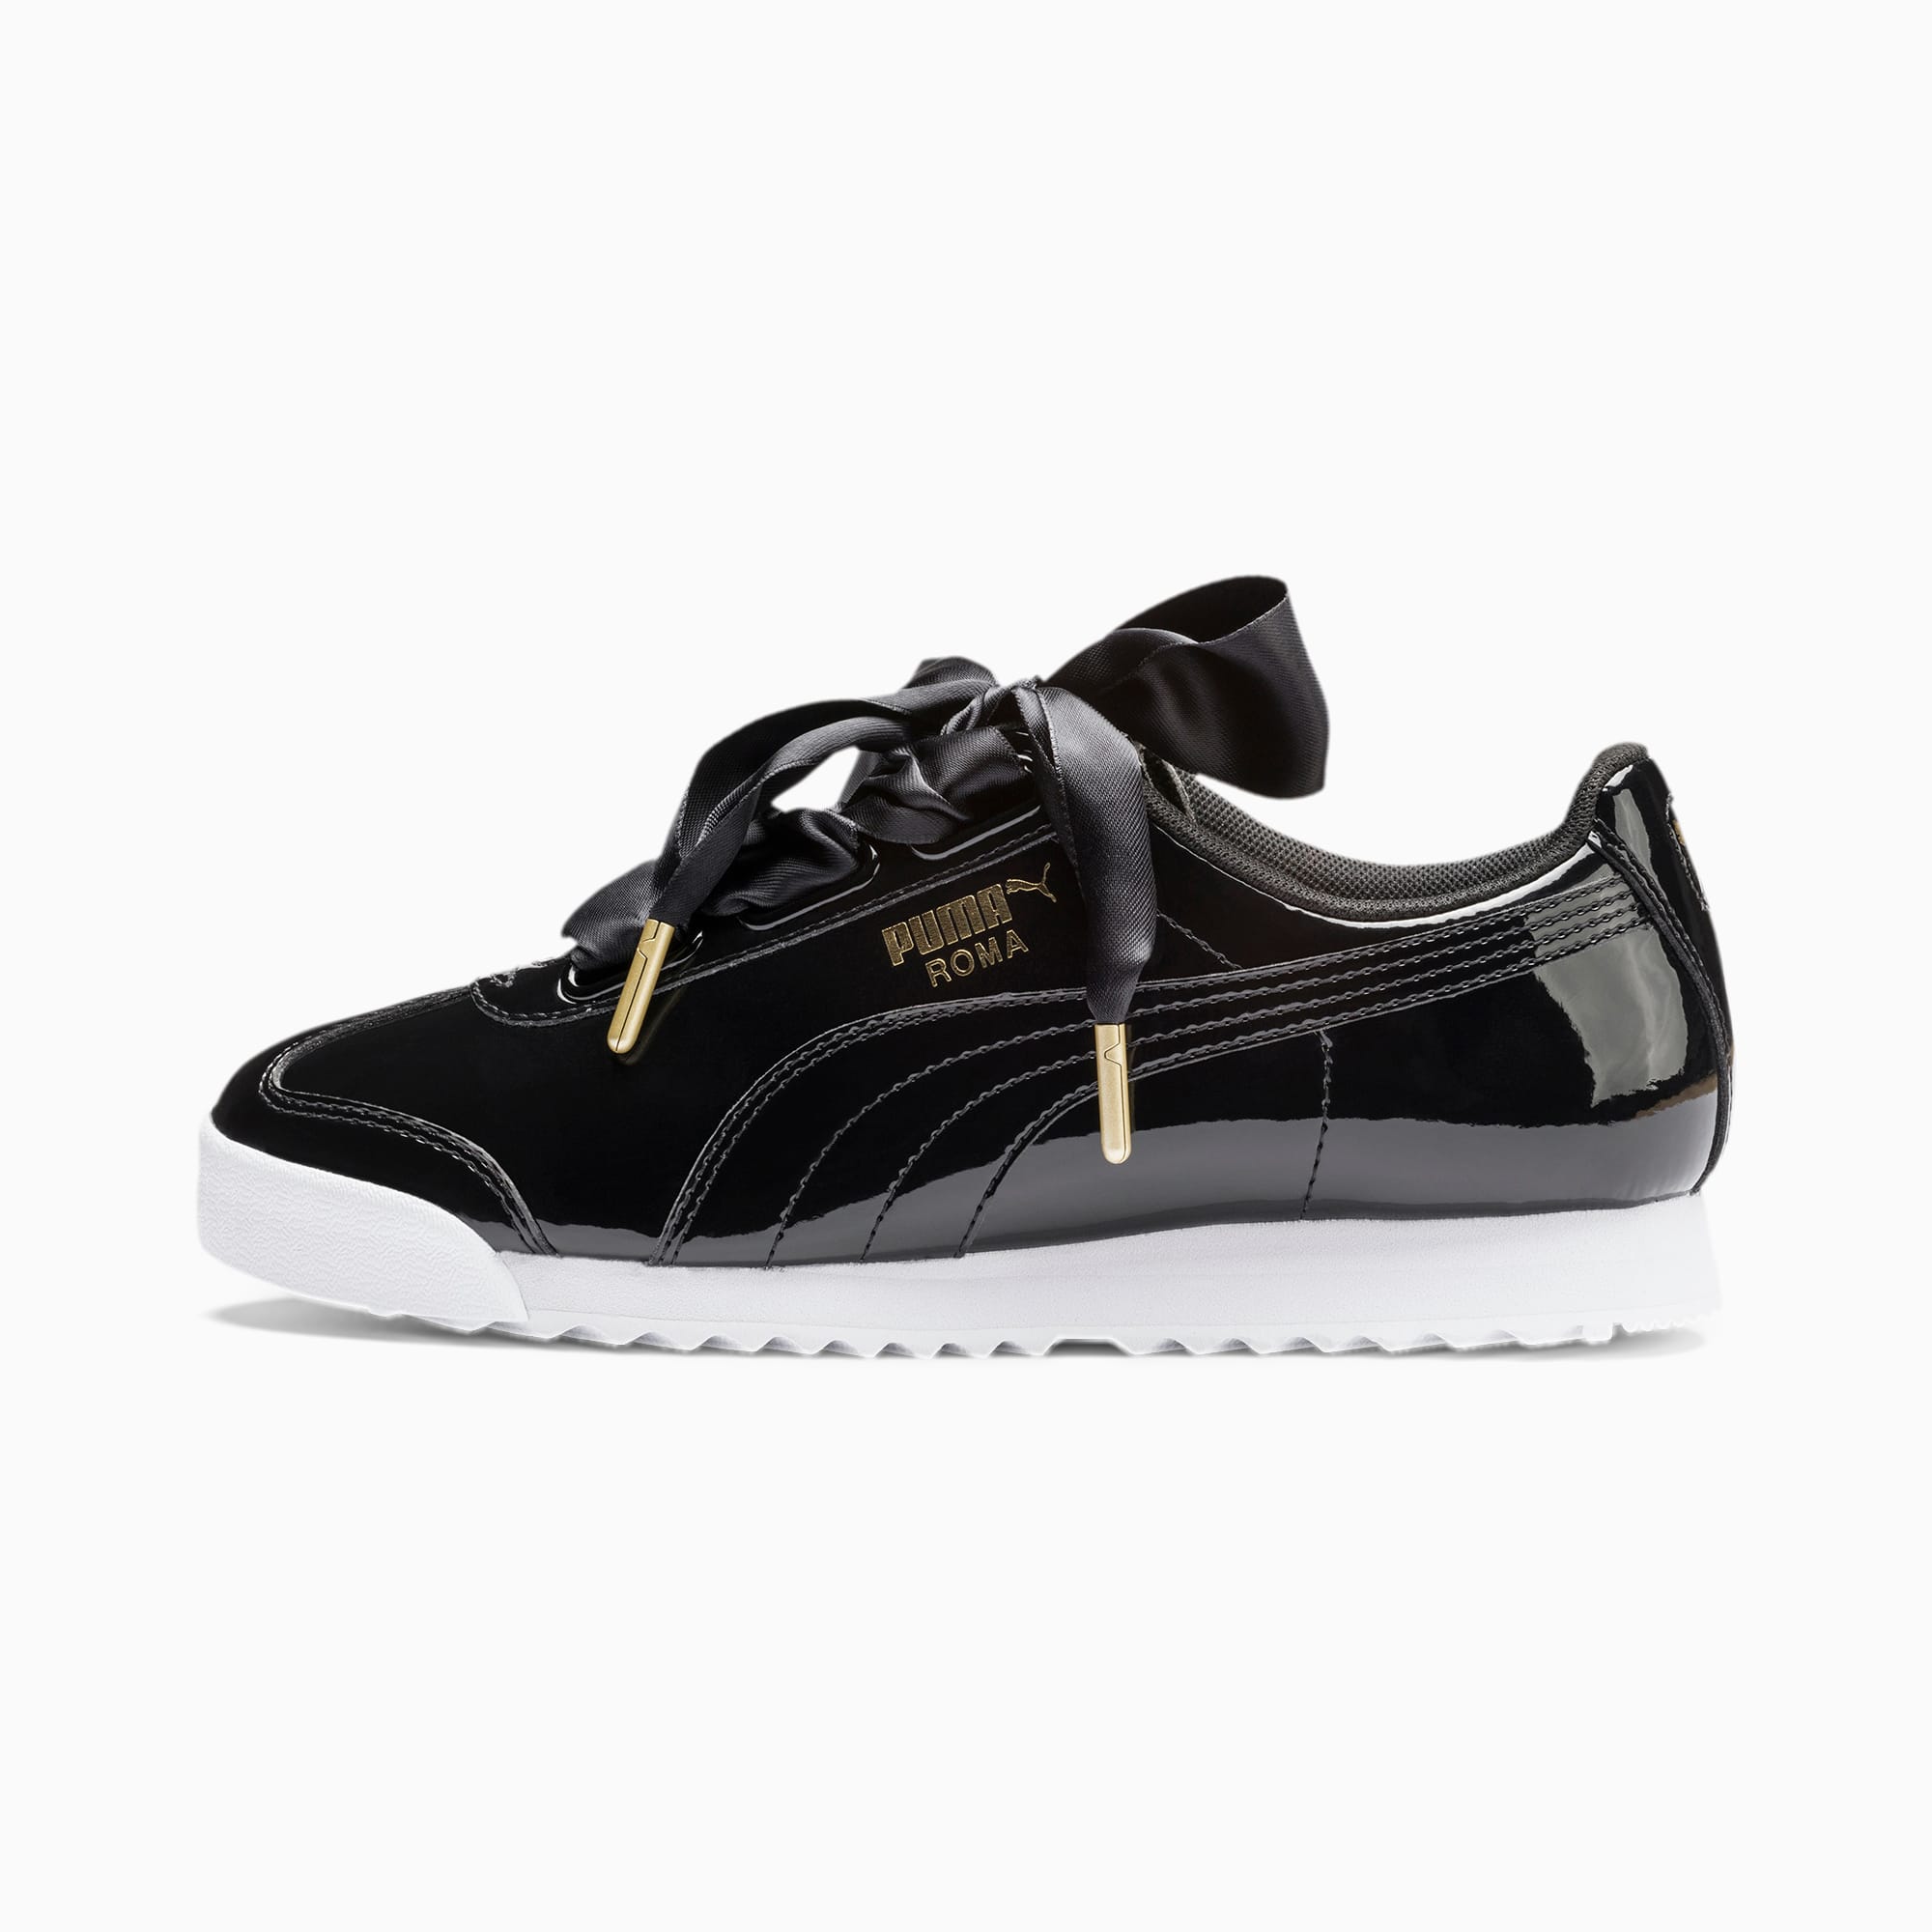 all black patent leather pumas